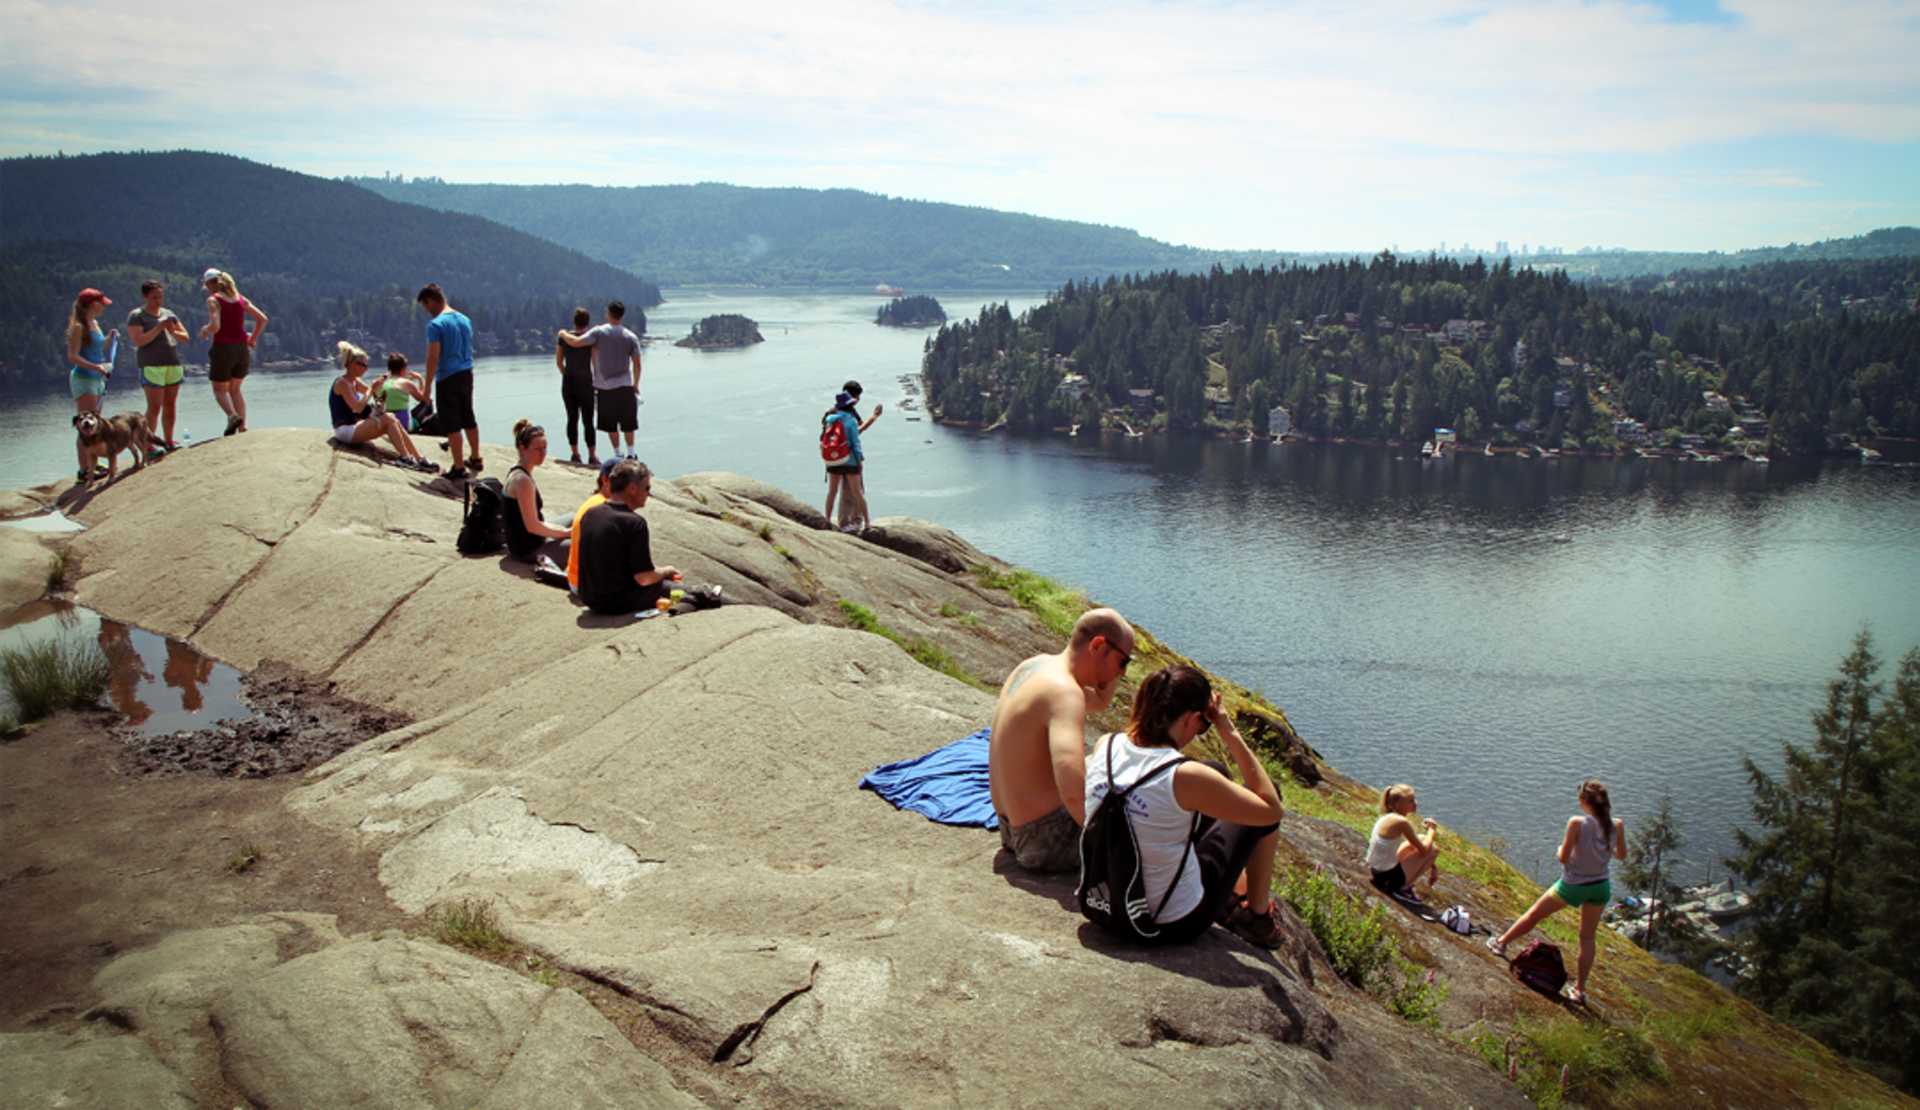 Hiking in Vancouver | Activities & Attractions in Vancouver